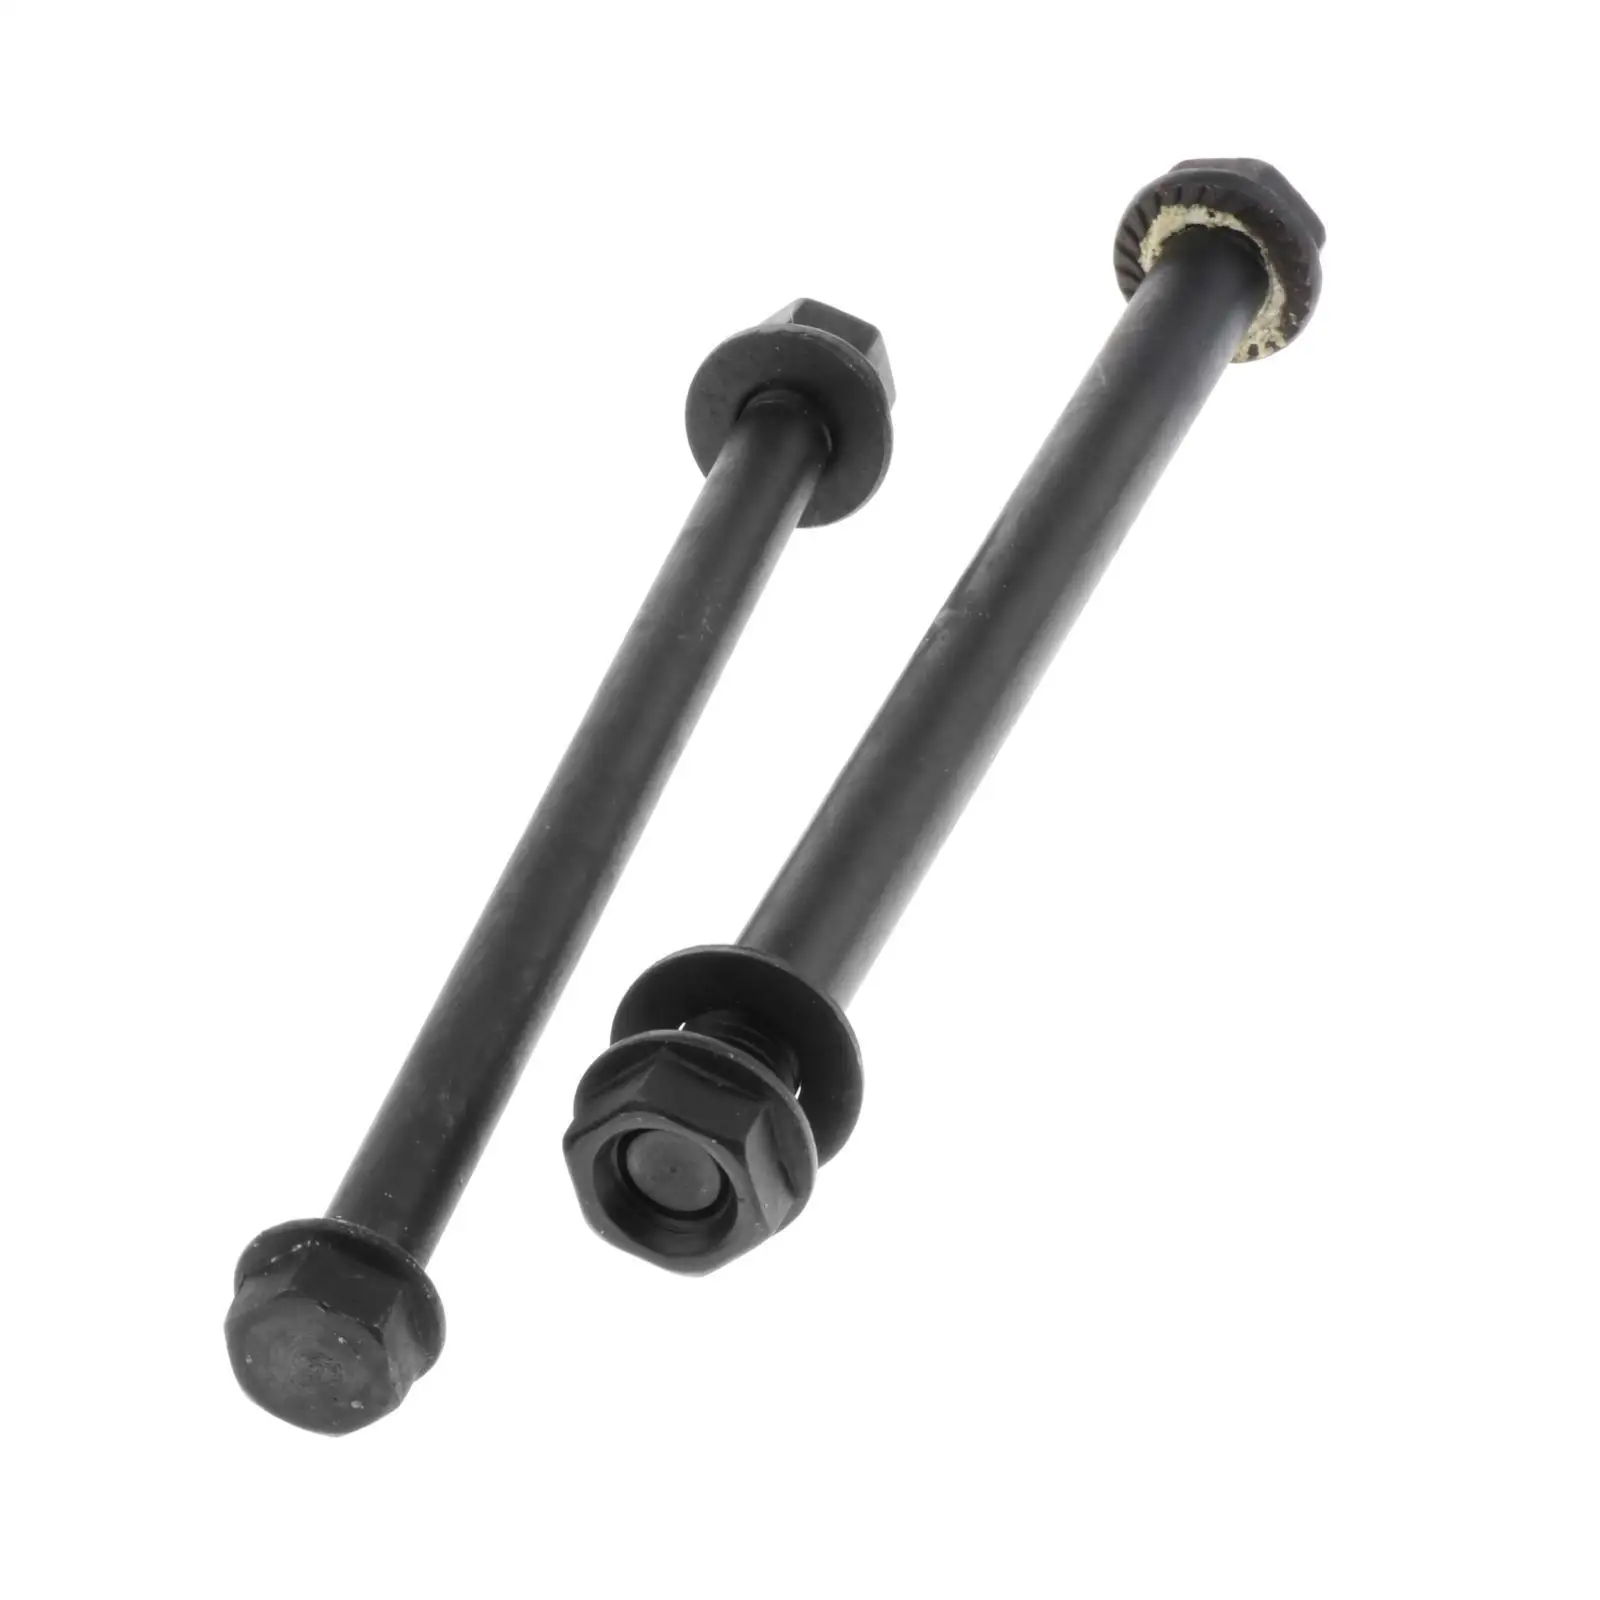 2x Rear Bearing Carrier Bolts and Nuts Set, Suitable for  Banshee 1989-2006 Parts Black, Easy to Install